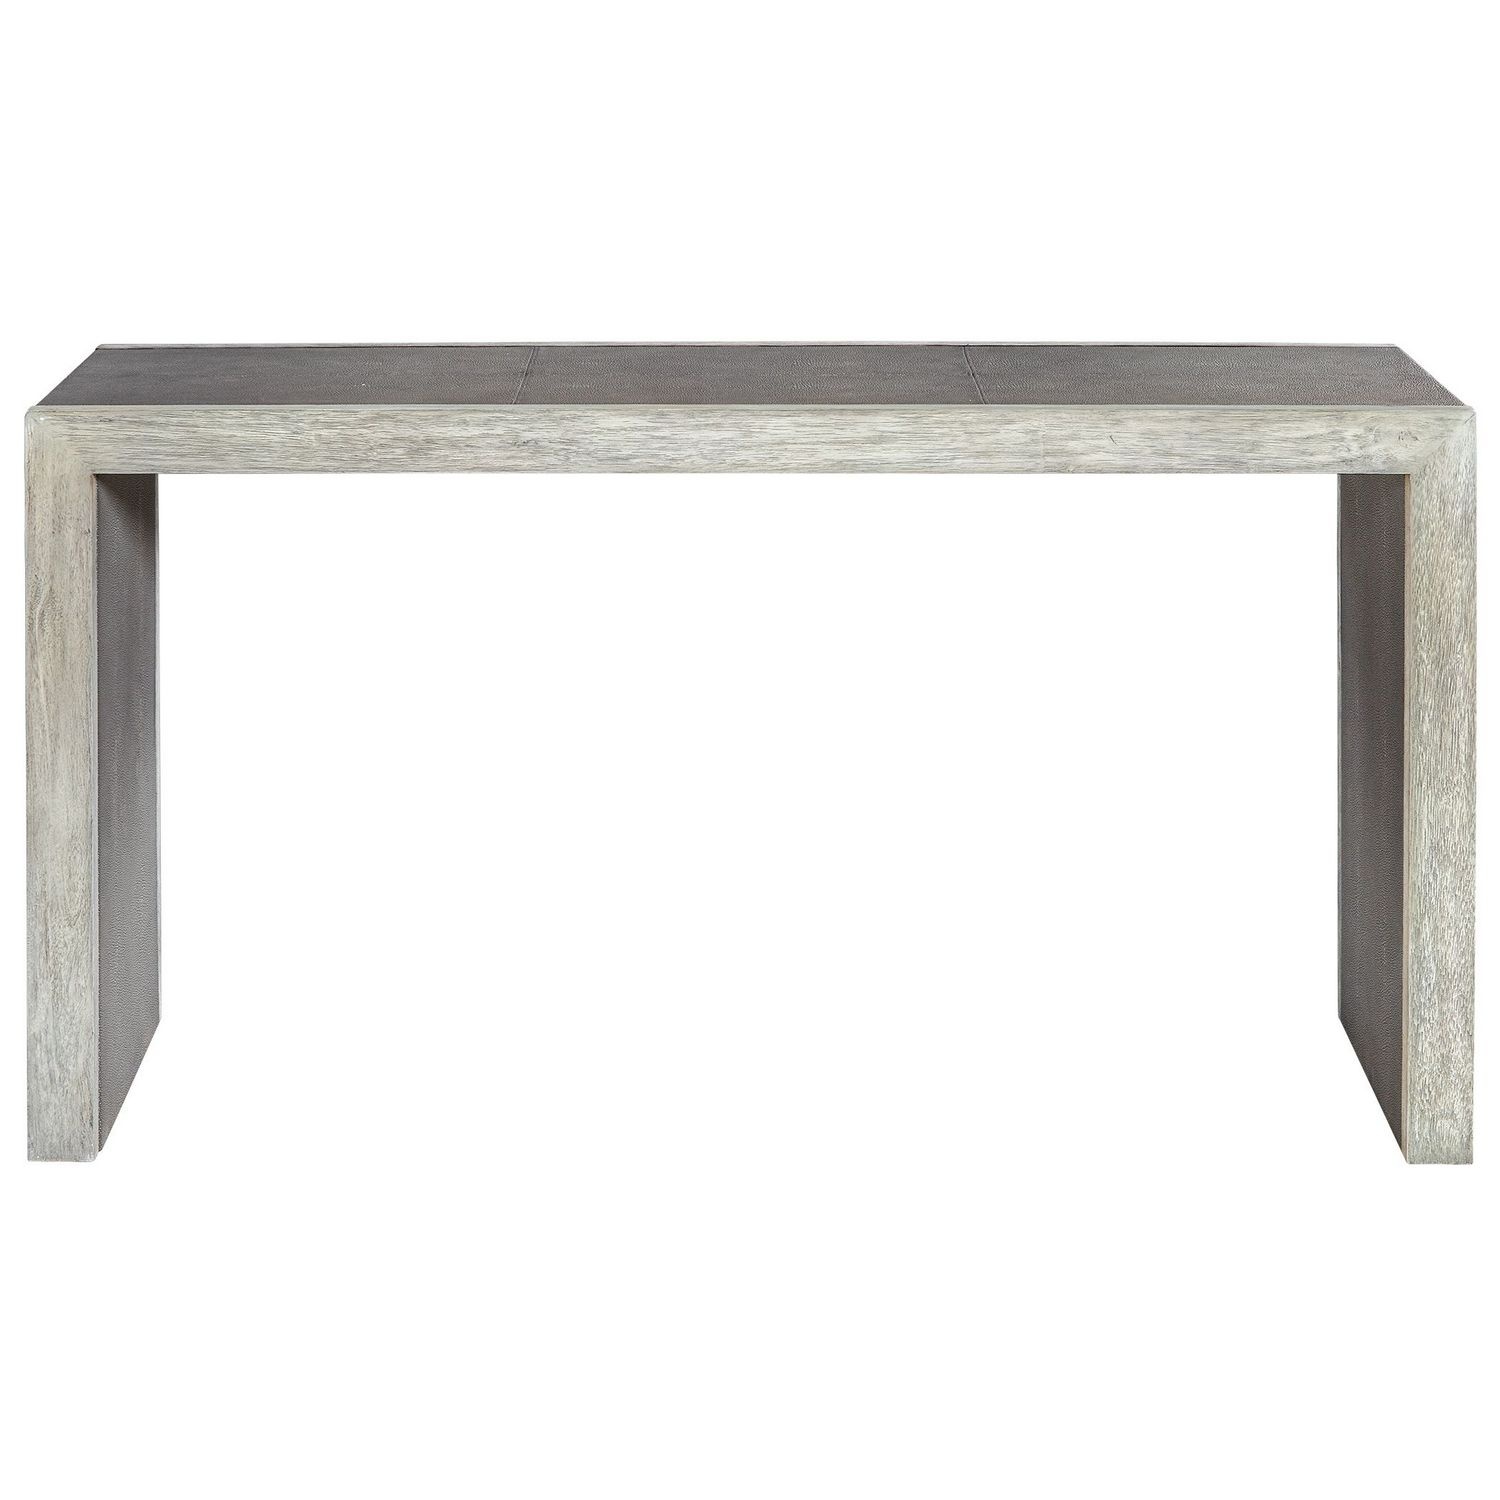 Uttermost Aerina Console Table - Aged Gray